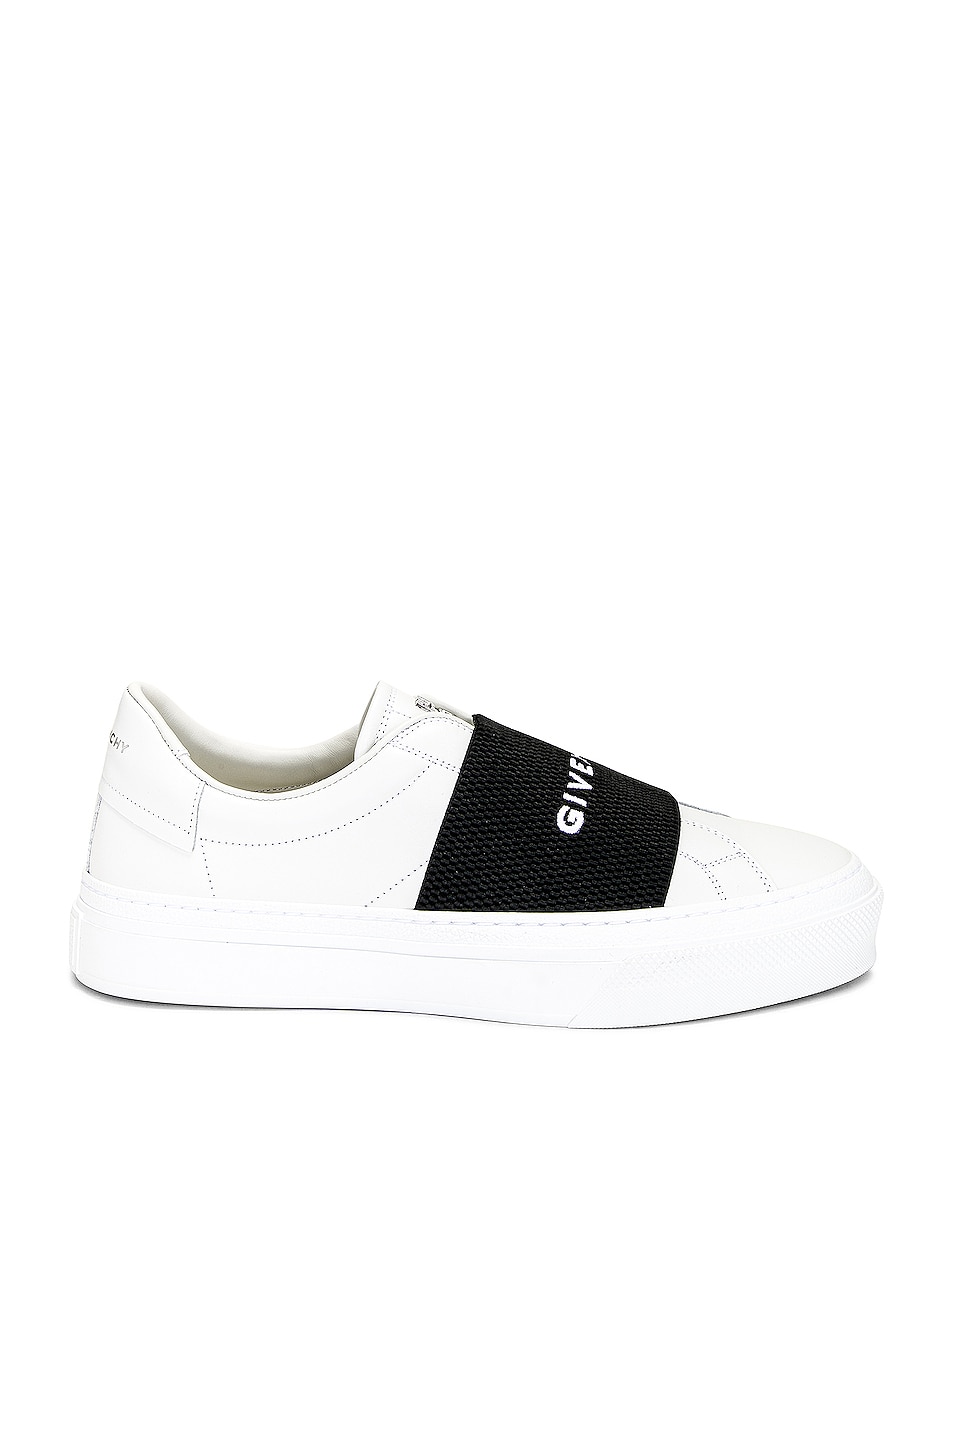 Image 1 of Givenchy City Sport Sneaker in Black & White